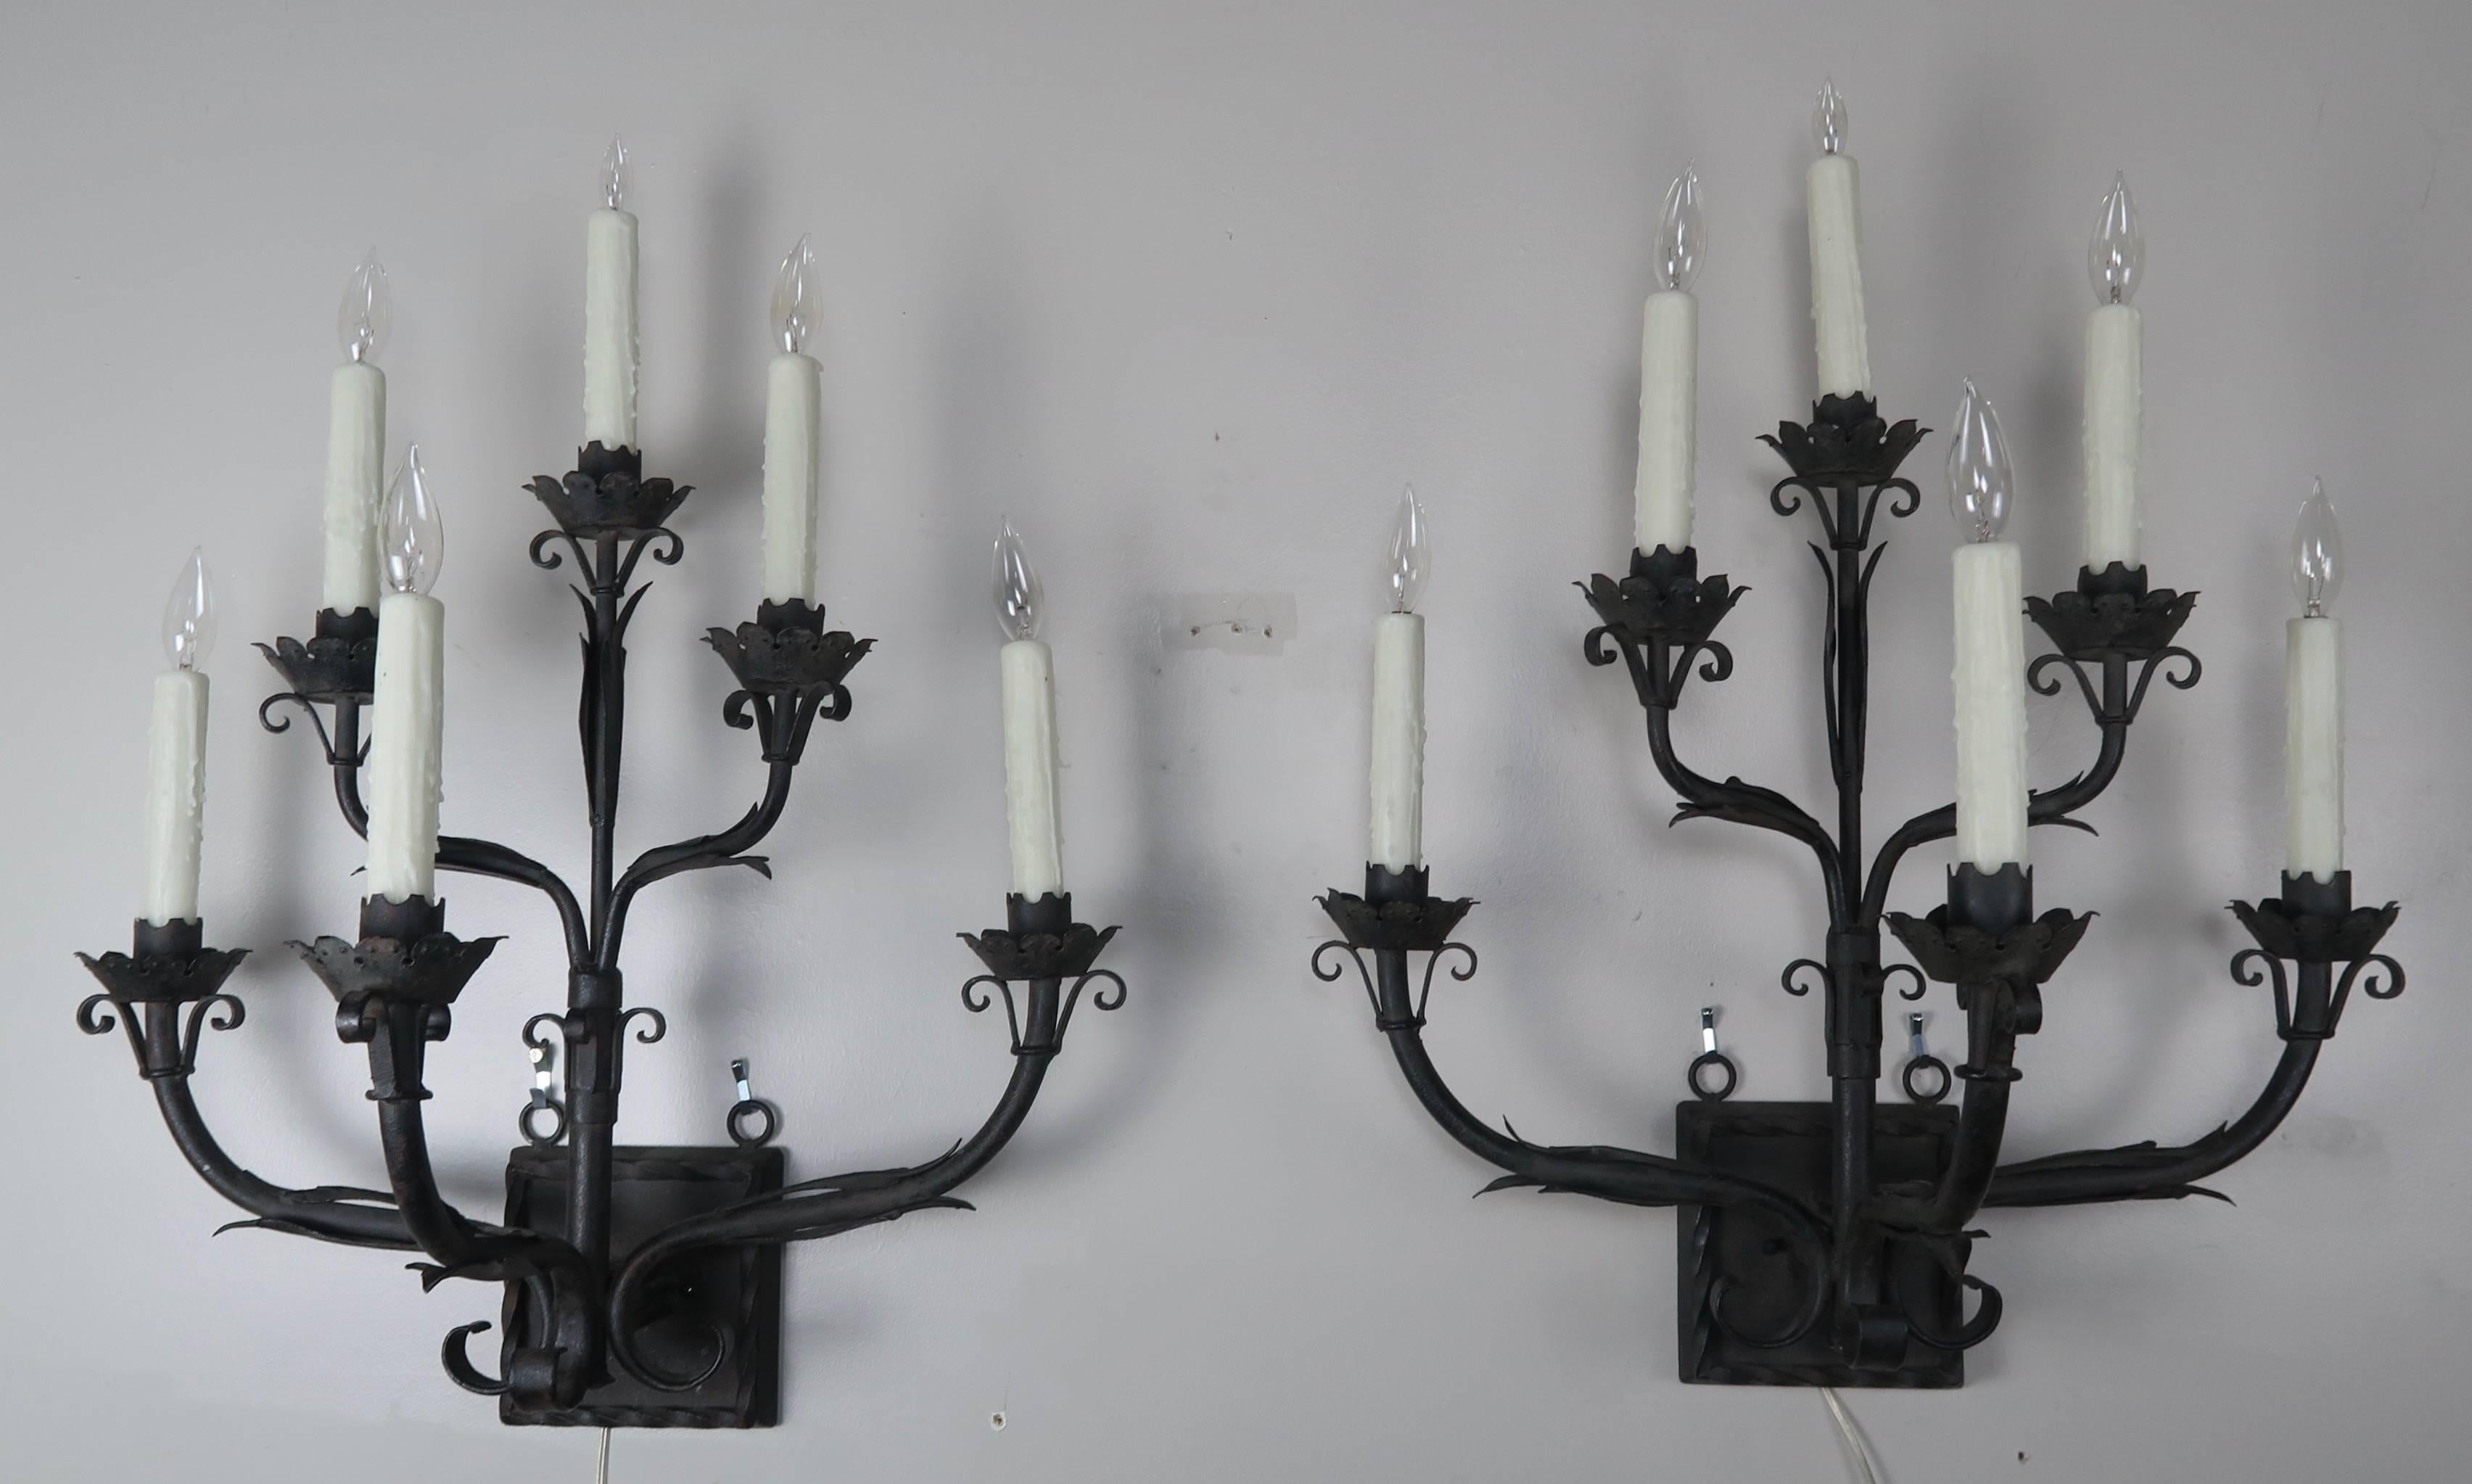 Pair of grand six-light Spanish wrought iron sconces. The pair of sconces has been newly rewired with drip wax candle covers and are ready to install.